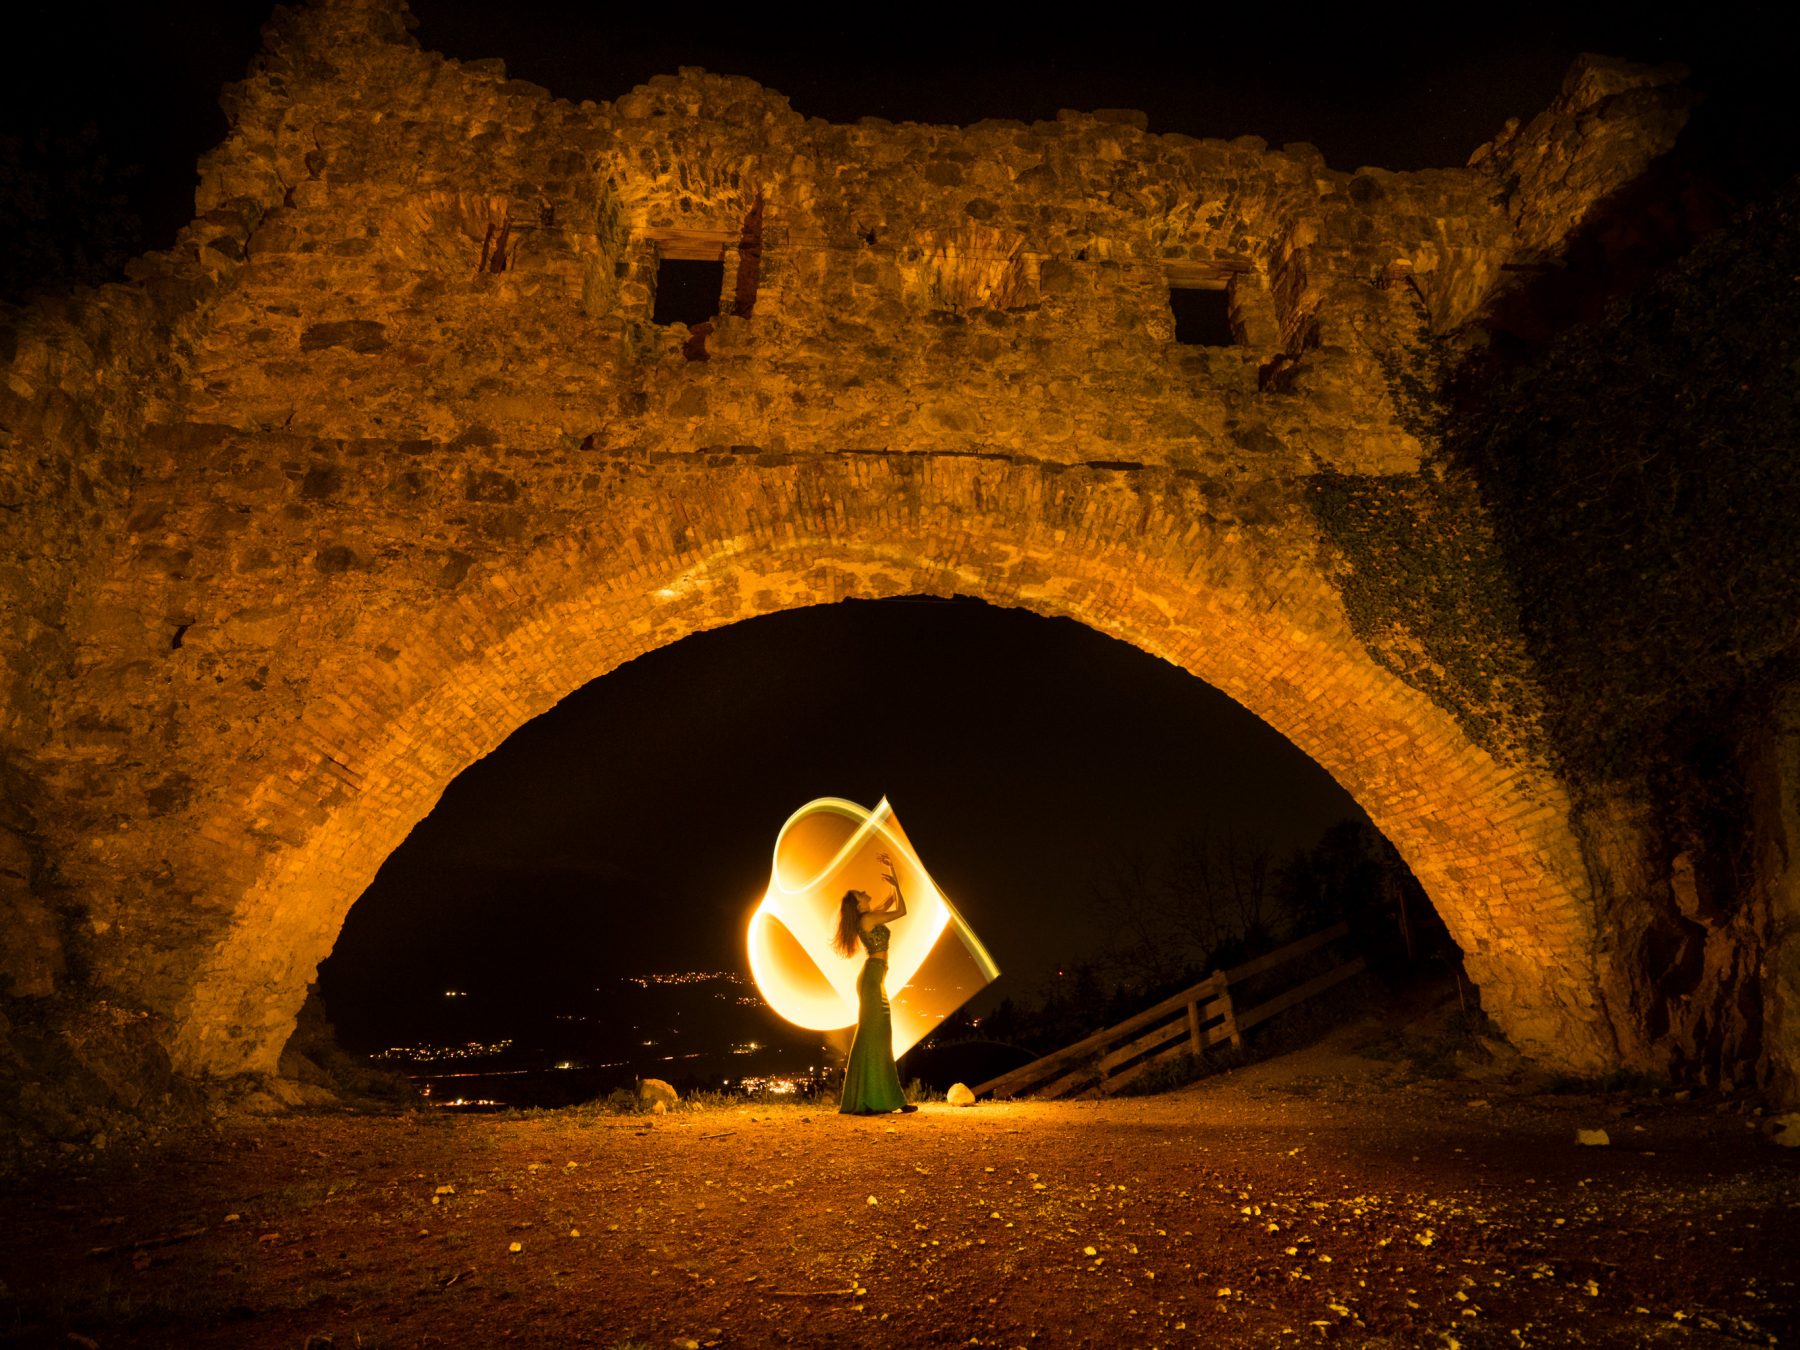 Lightpainting-session with Lena Rodlsberger (5/8)